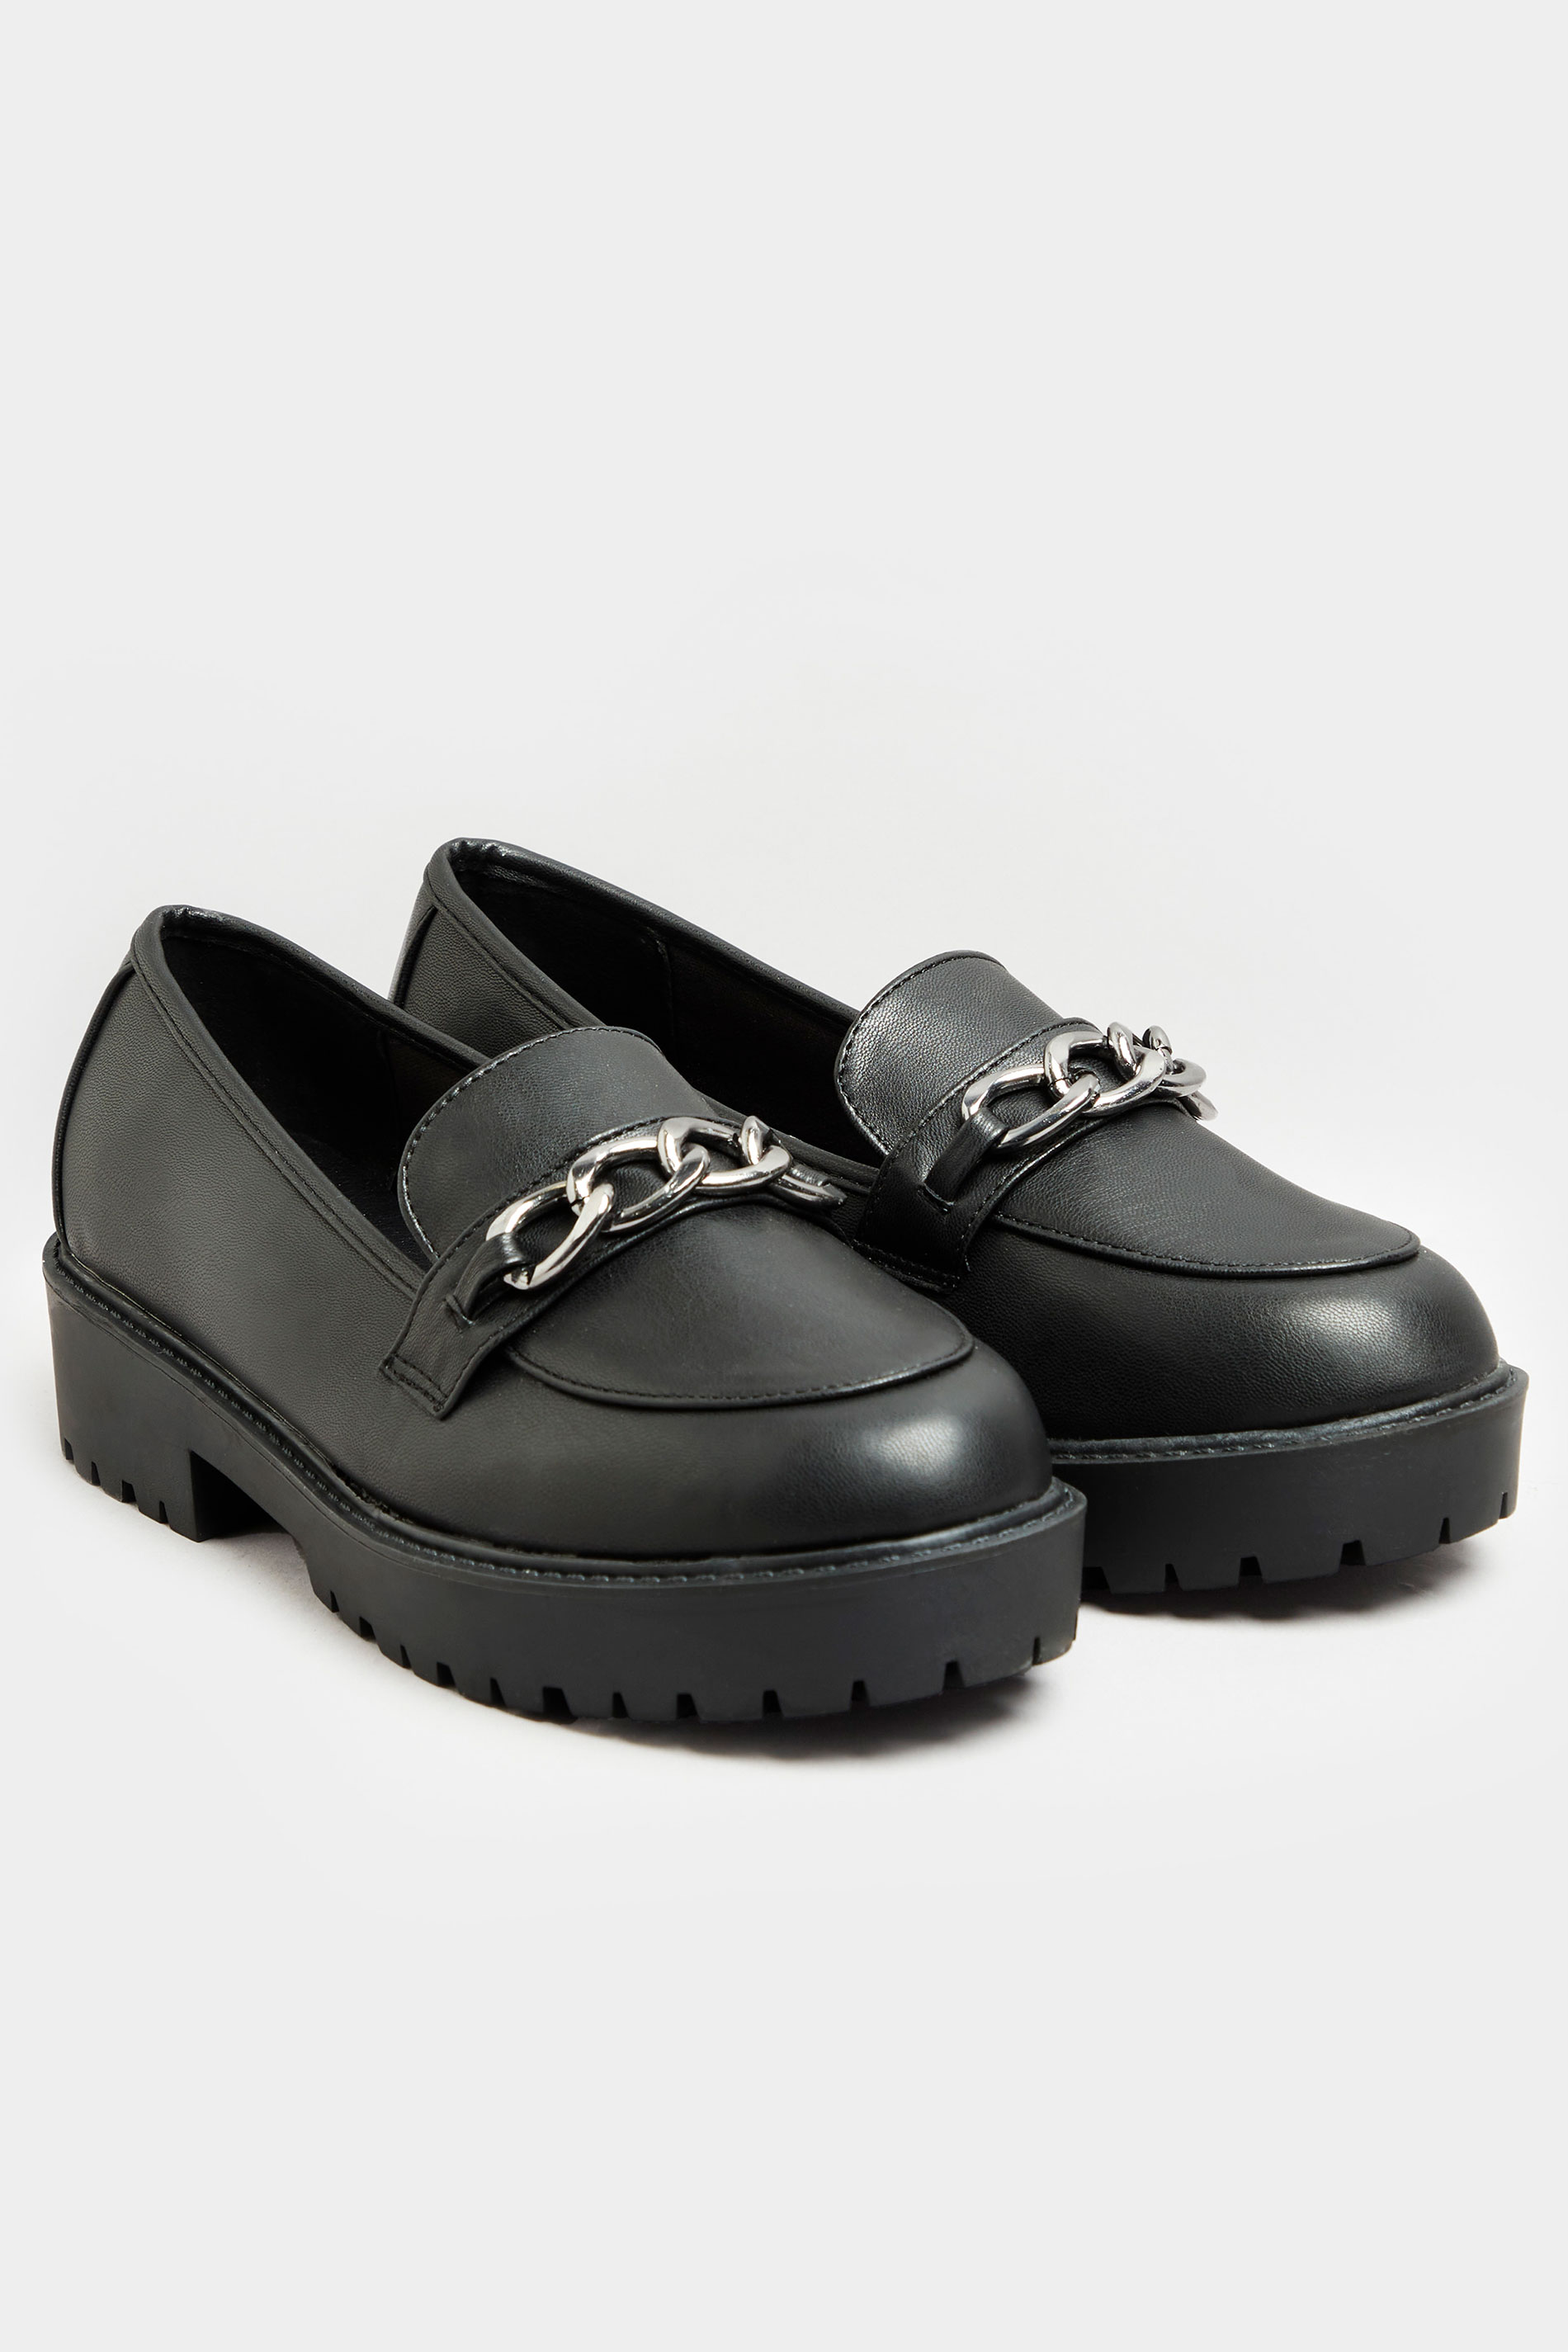 LIMITED COLLECTION Black Chunky Loafers In Extra Wide Fit_A.jpg